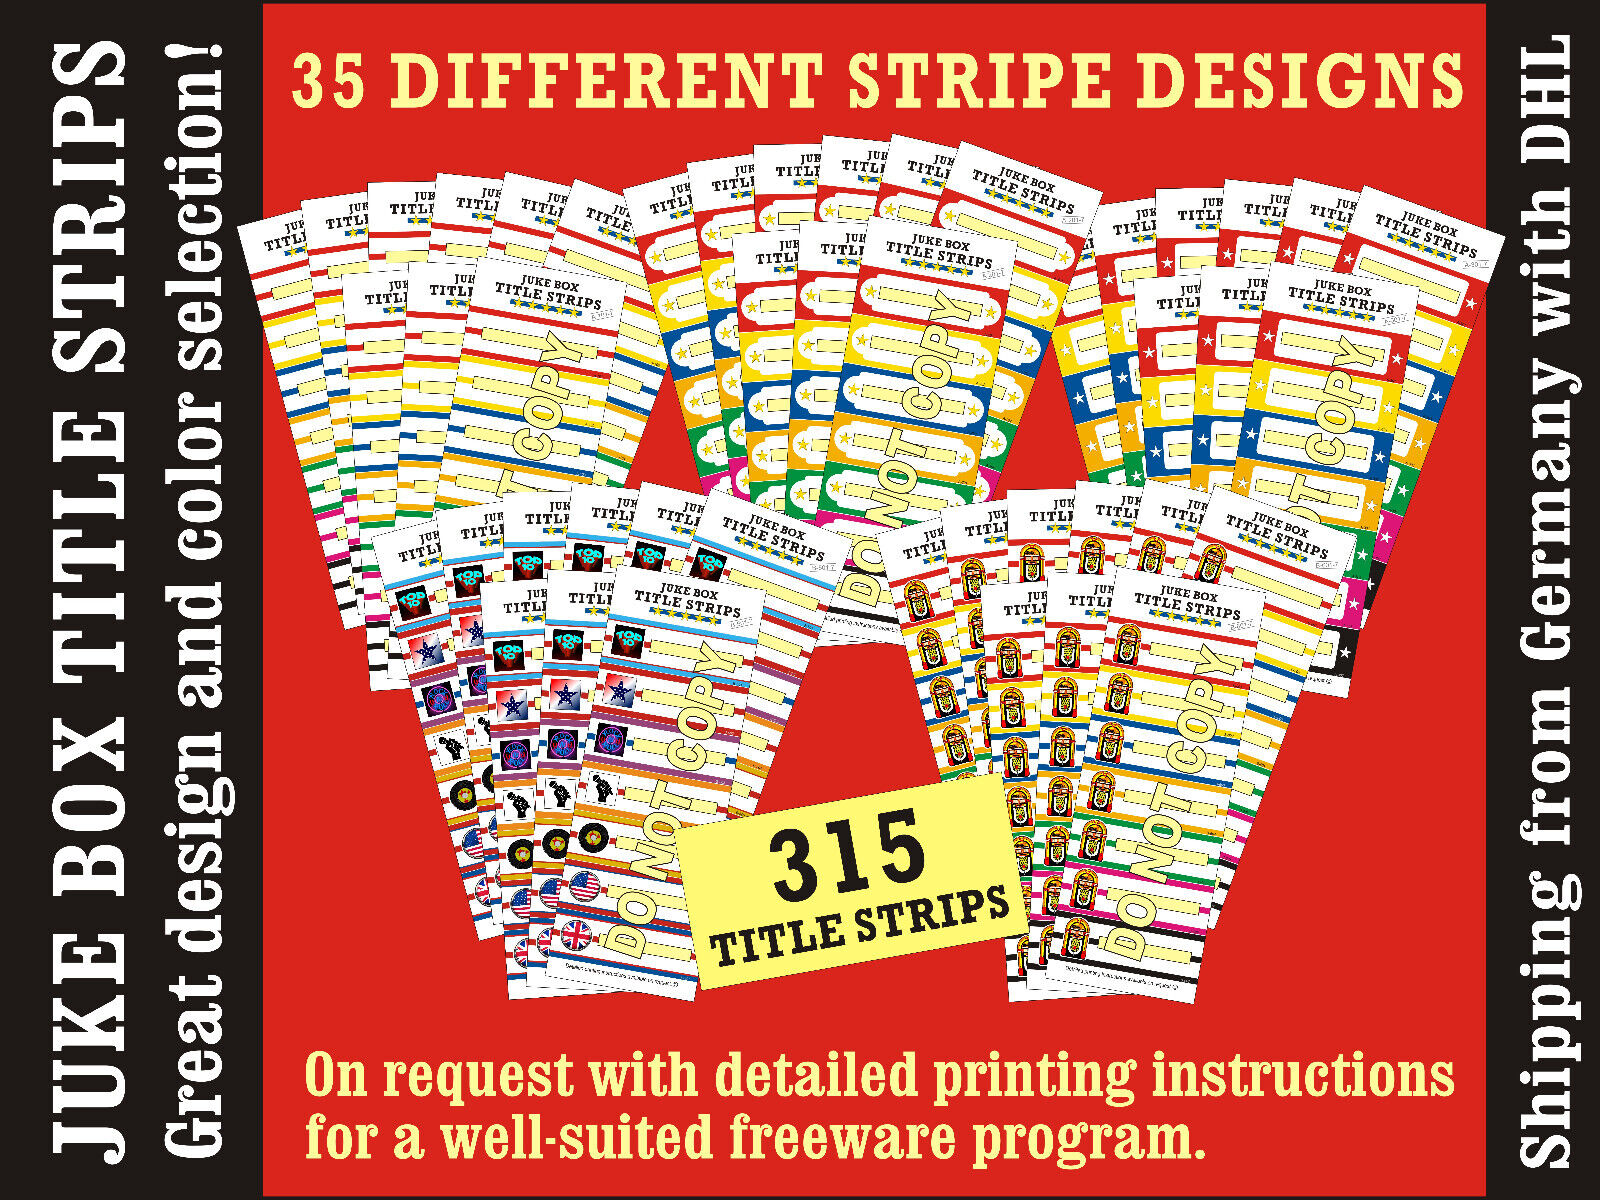 ⭐ 315 Jukebox Title Strips MIXED-SET ⭐ 45 blank sheeds incl. Printing-Template